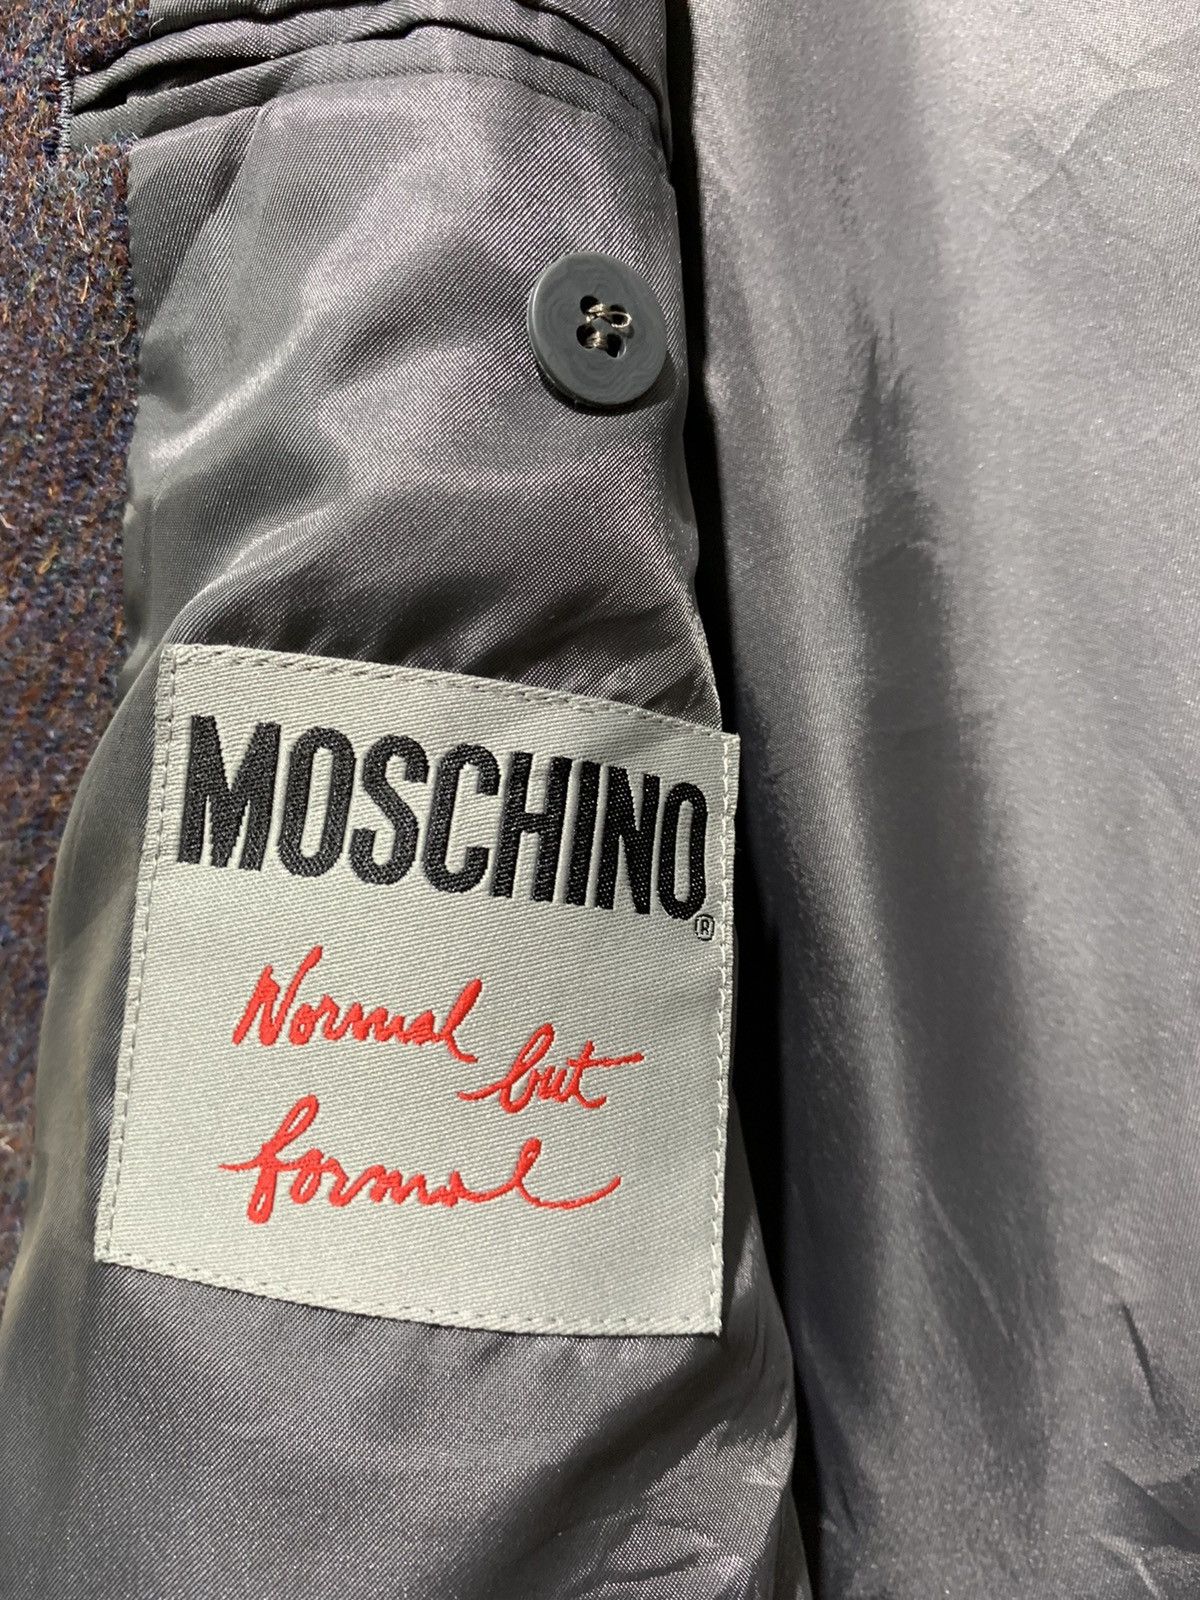 🔥MOSCHINO NORMAL BUT FORMAL MENS WOOL JACKETS - 9